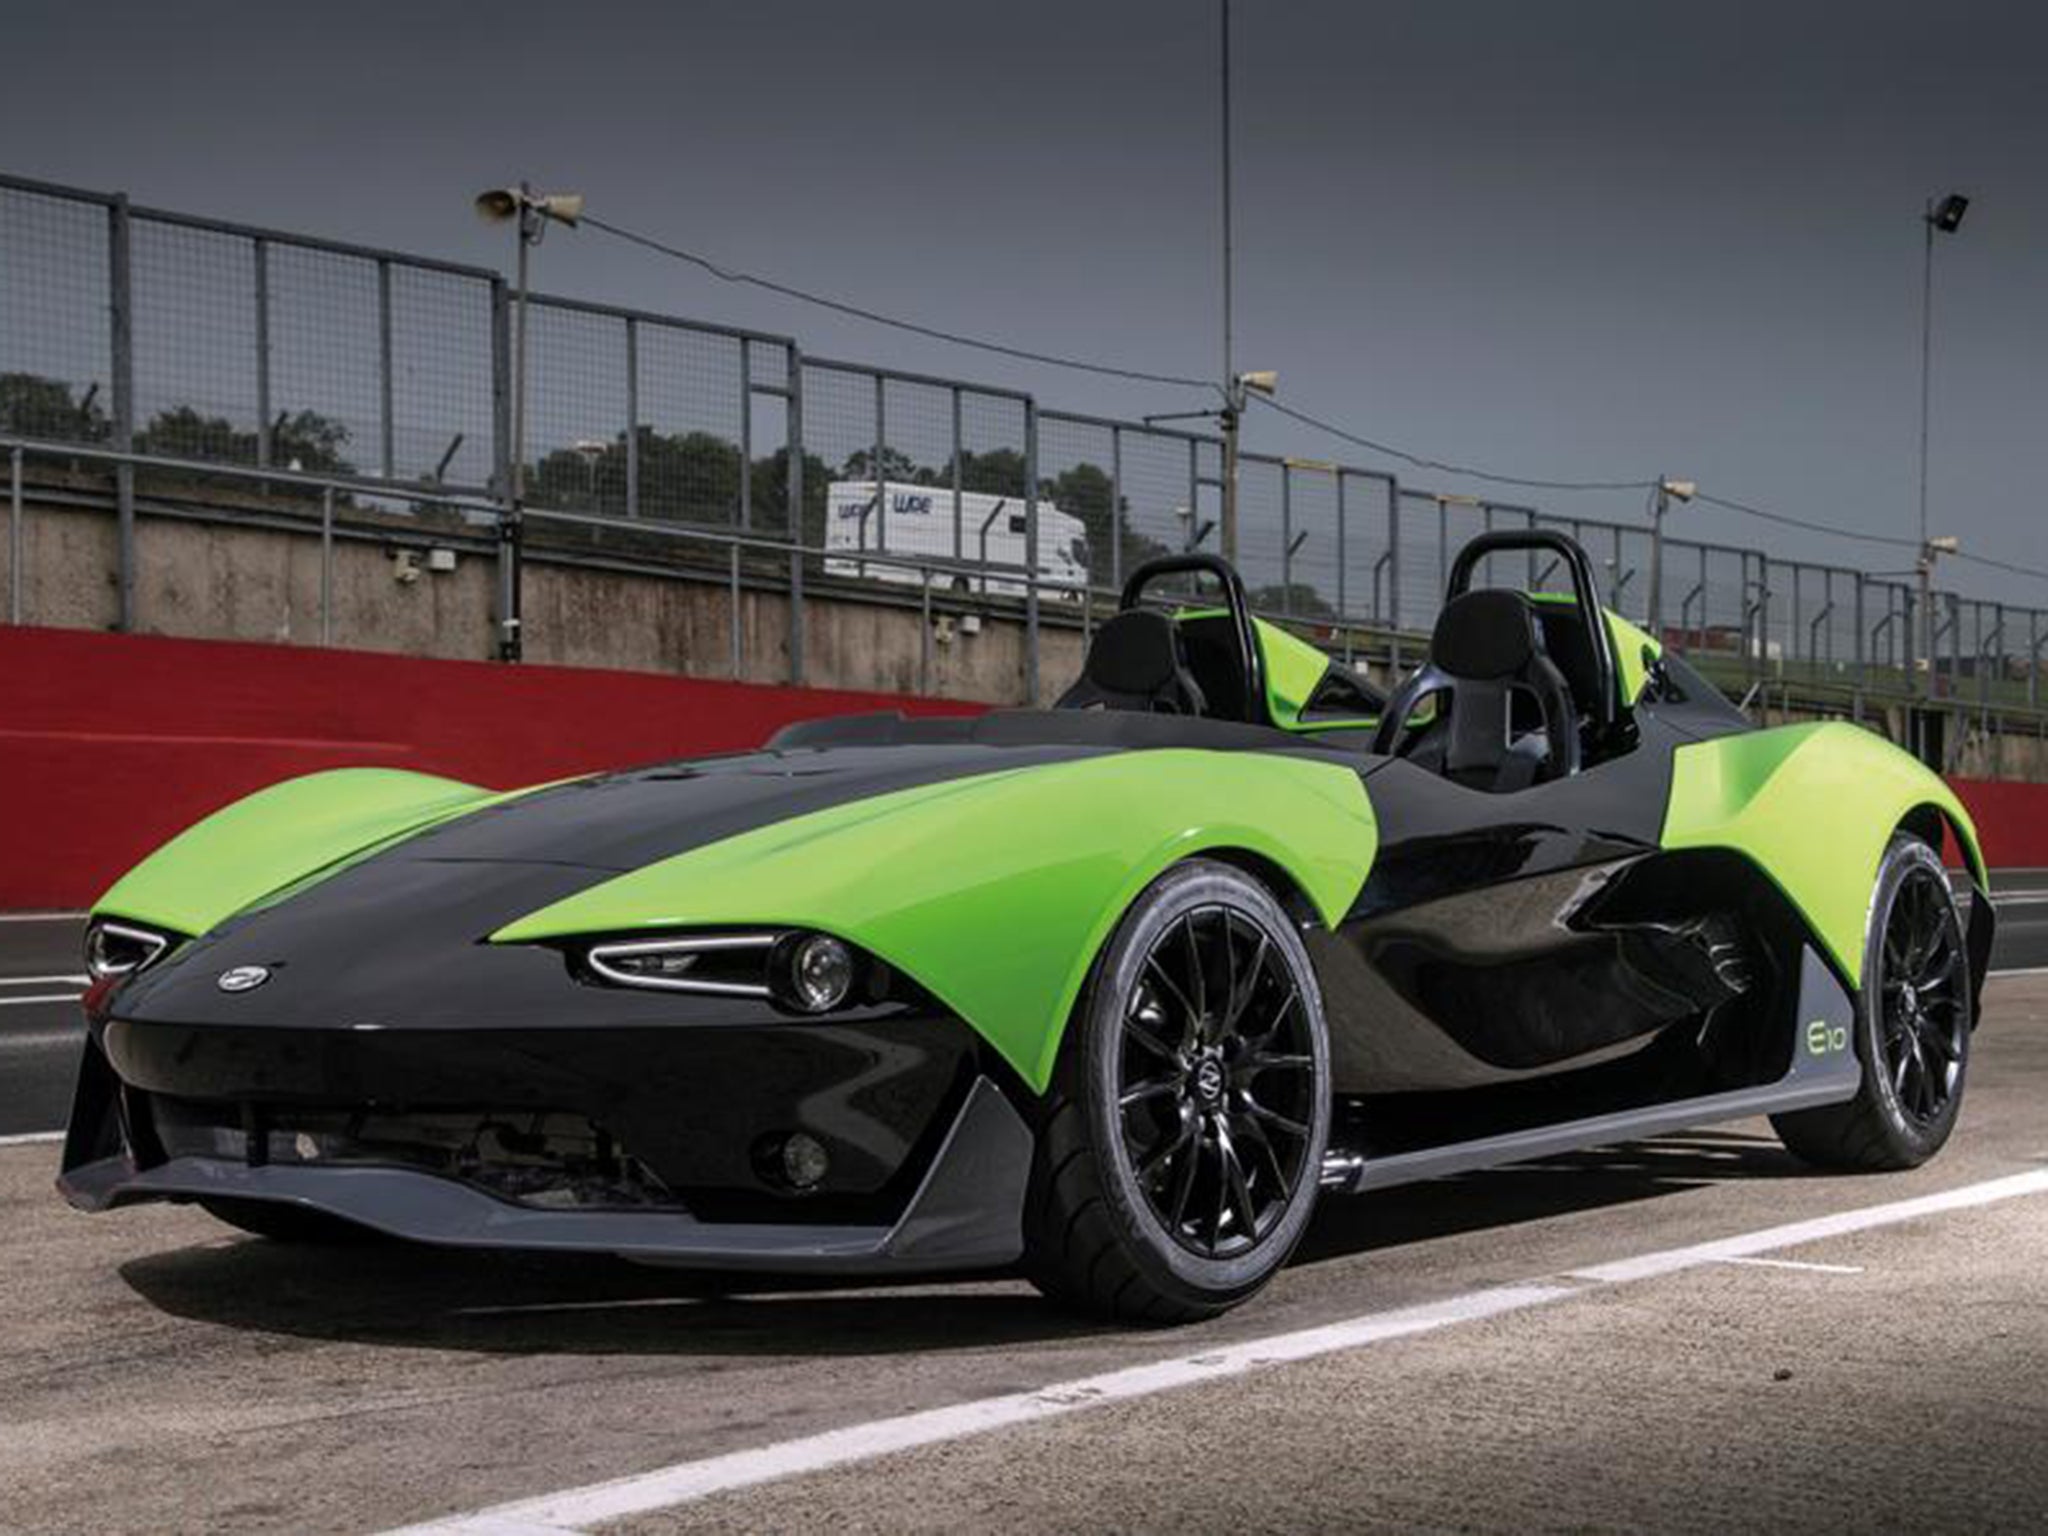 Prices for the E10 models start at £24,995, making them an affordable way to get near-racecar performance